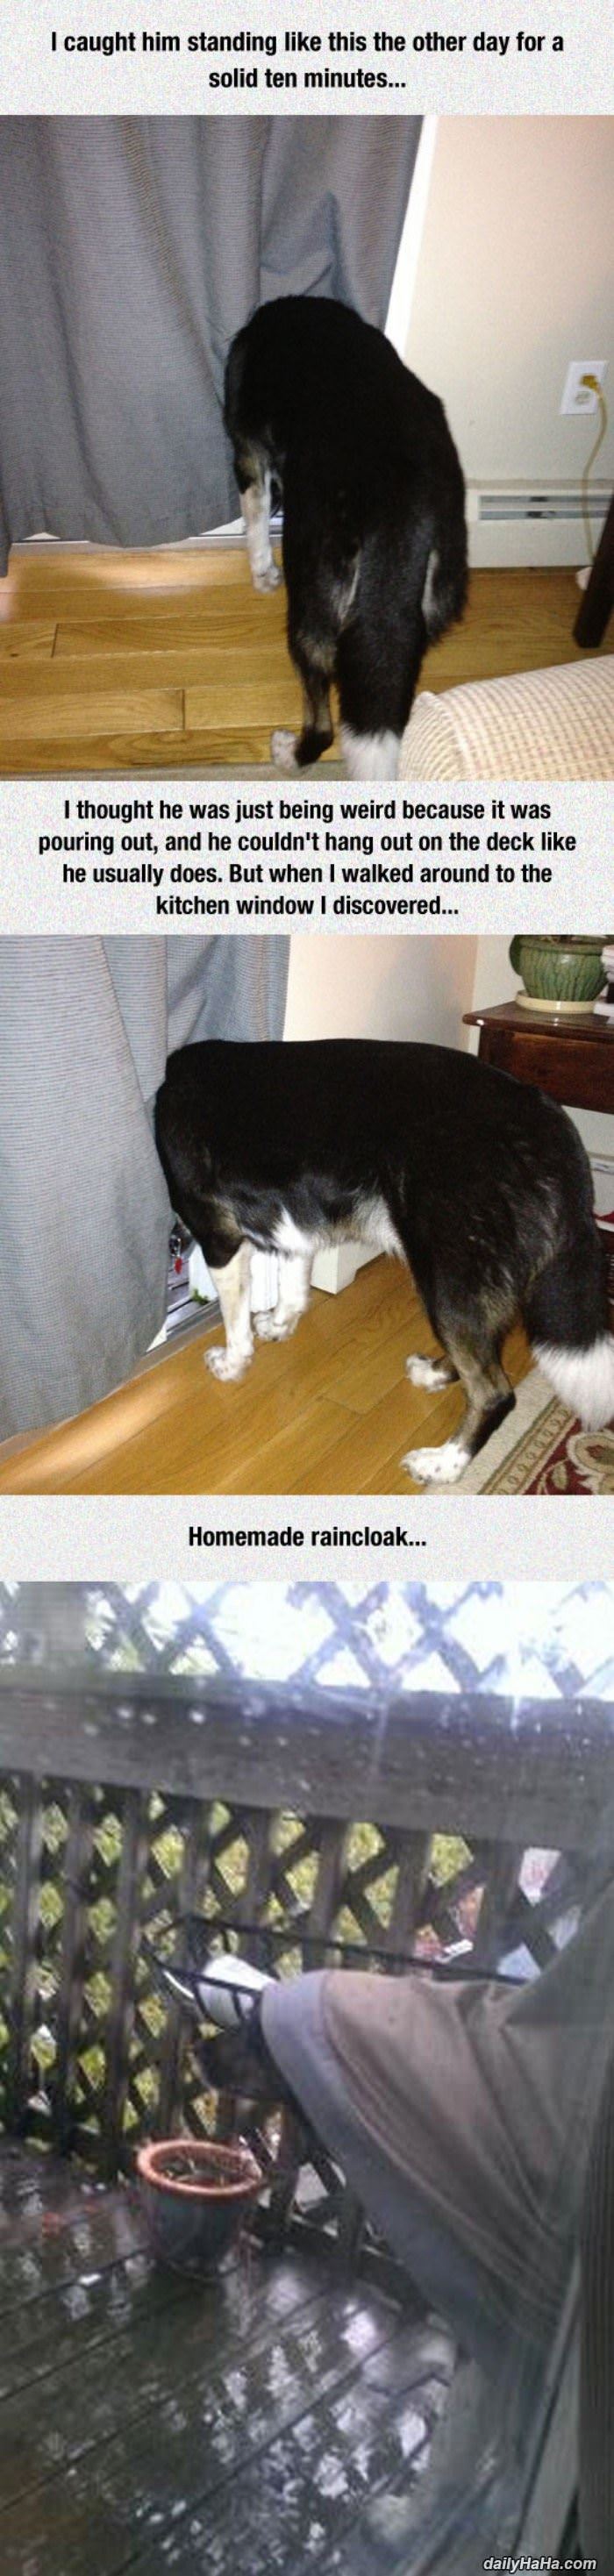 dog was standing like this funny picture